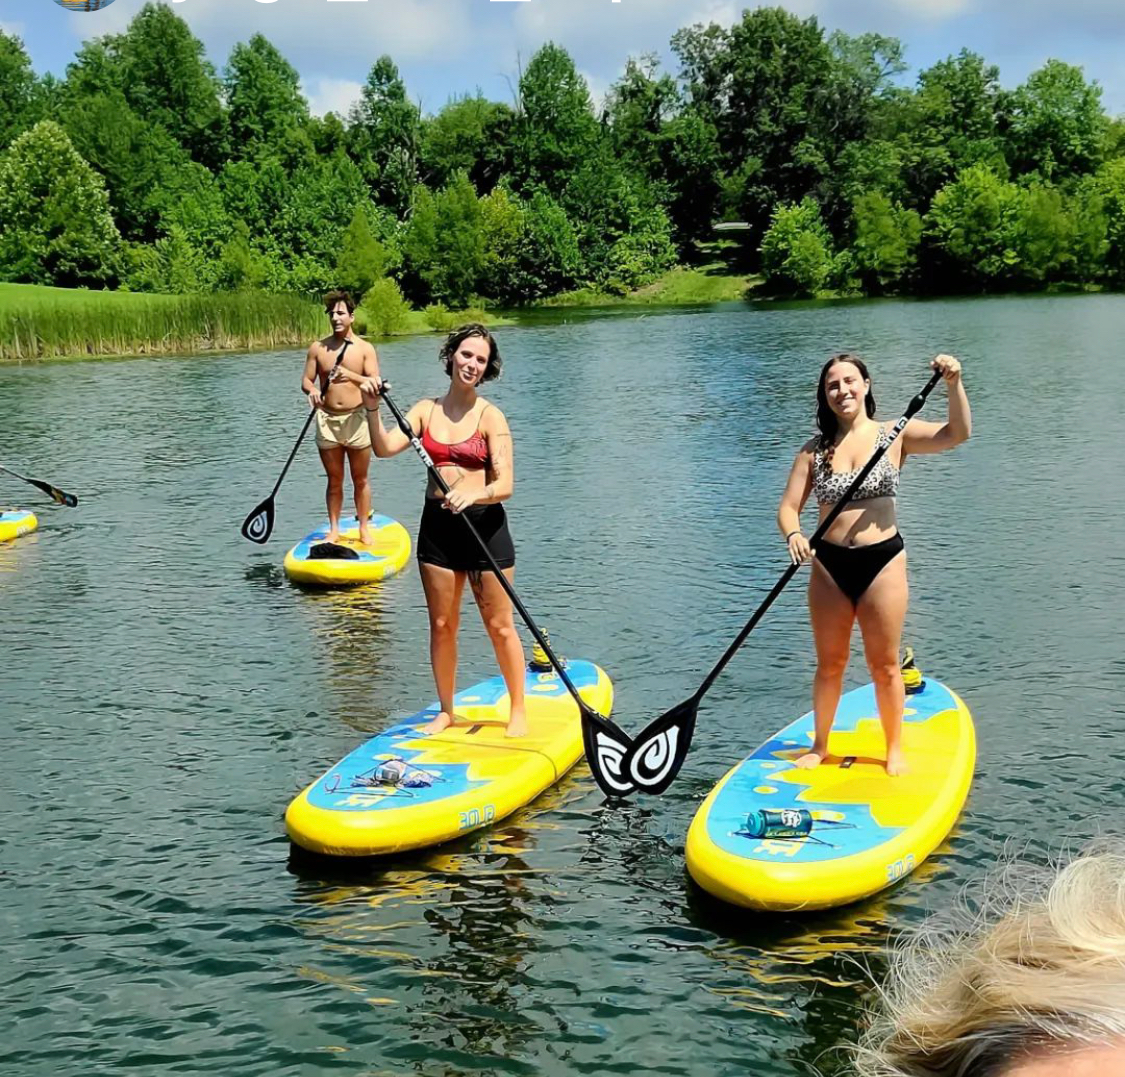 paddle boarding helps cardiovascular health benefits 